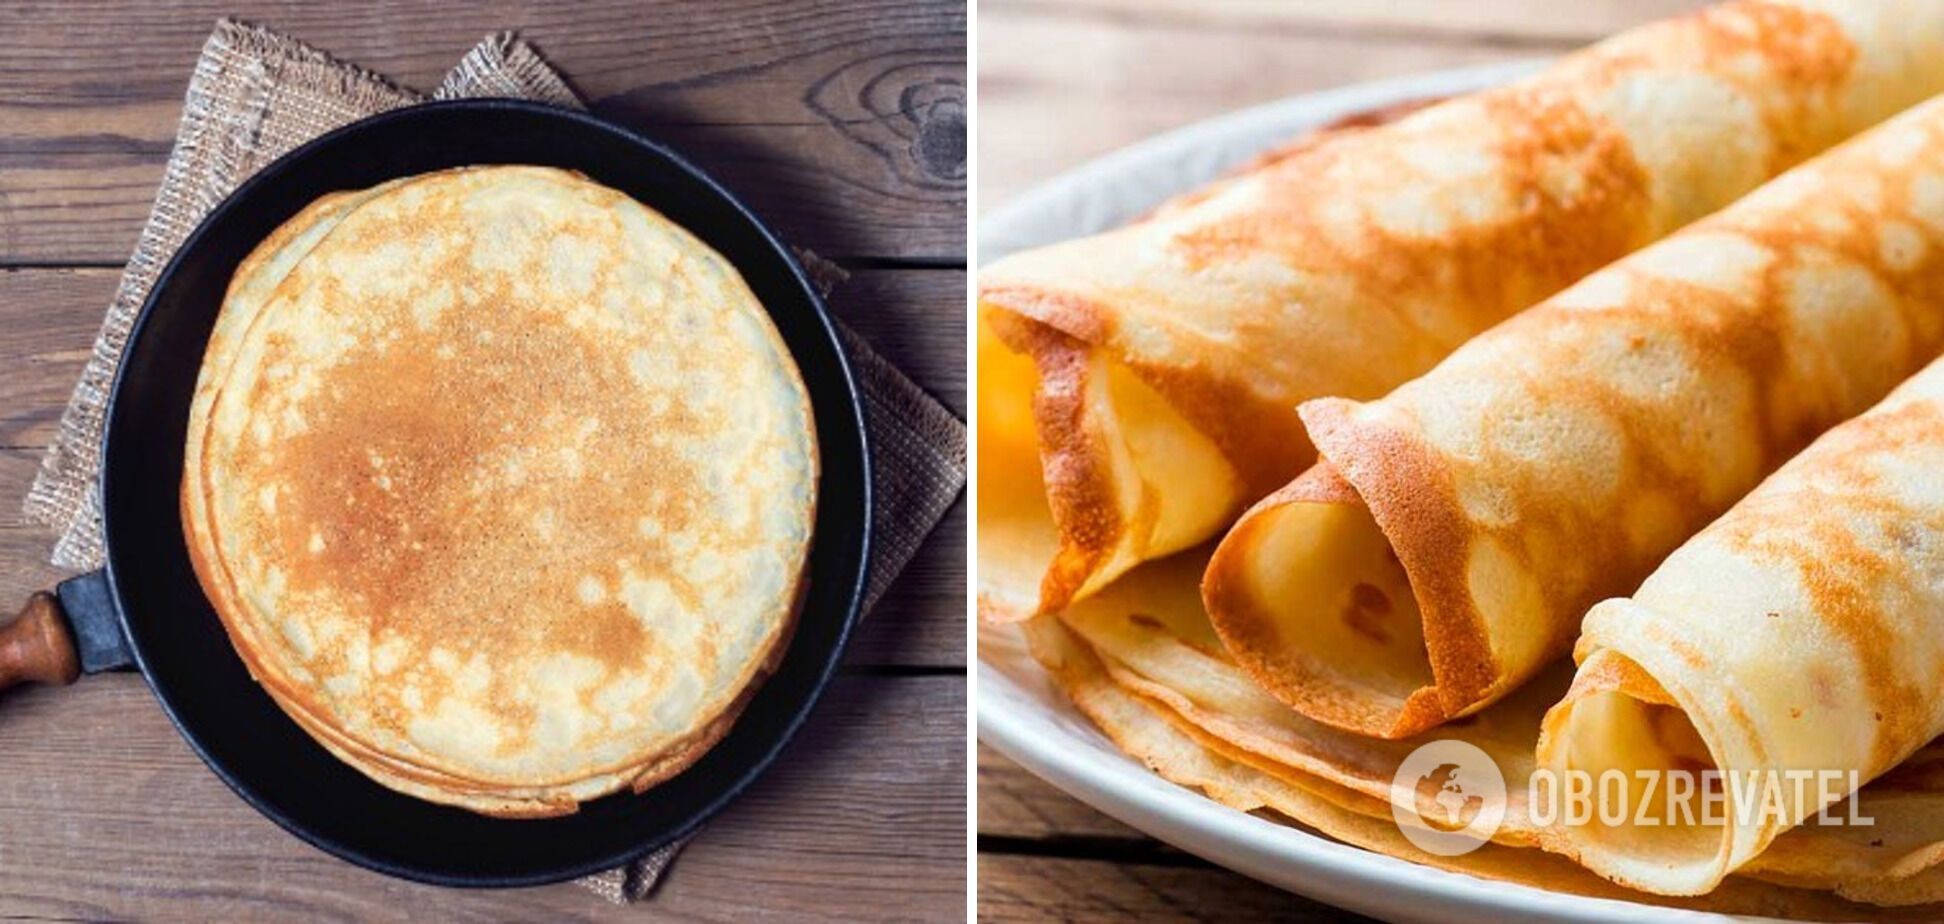 What to cook with pancakes